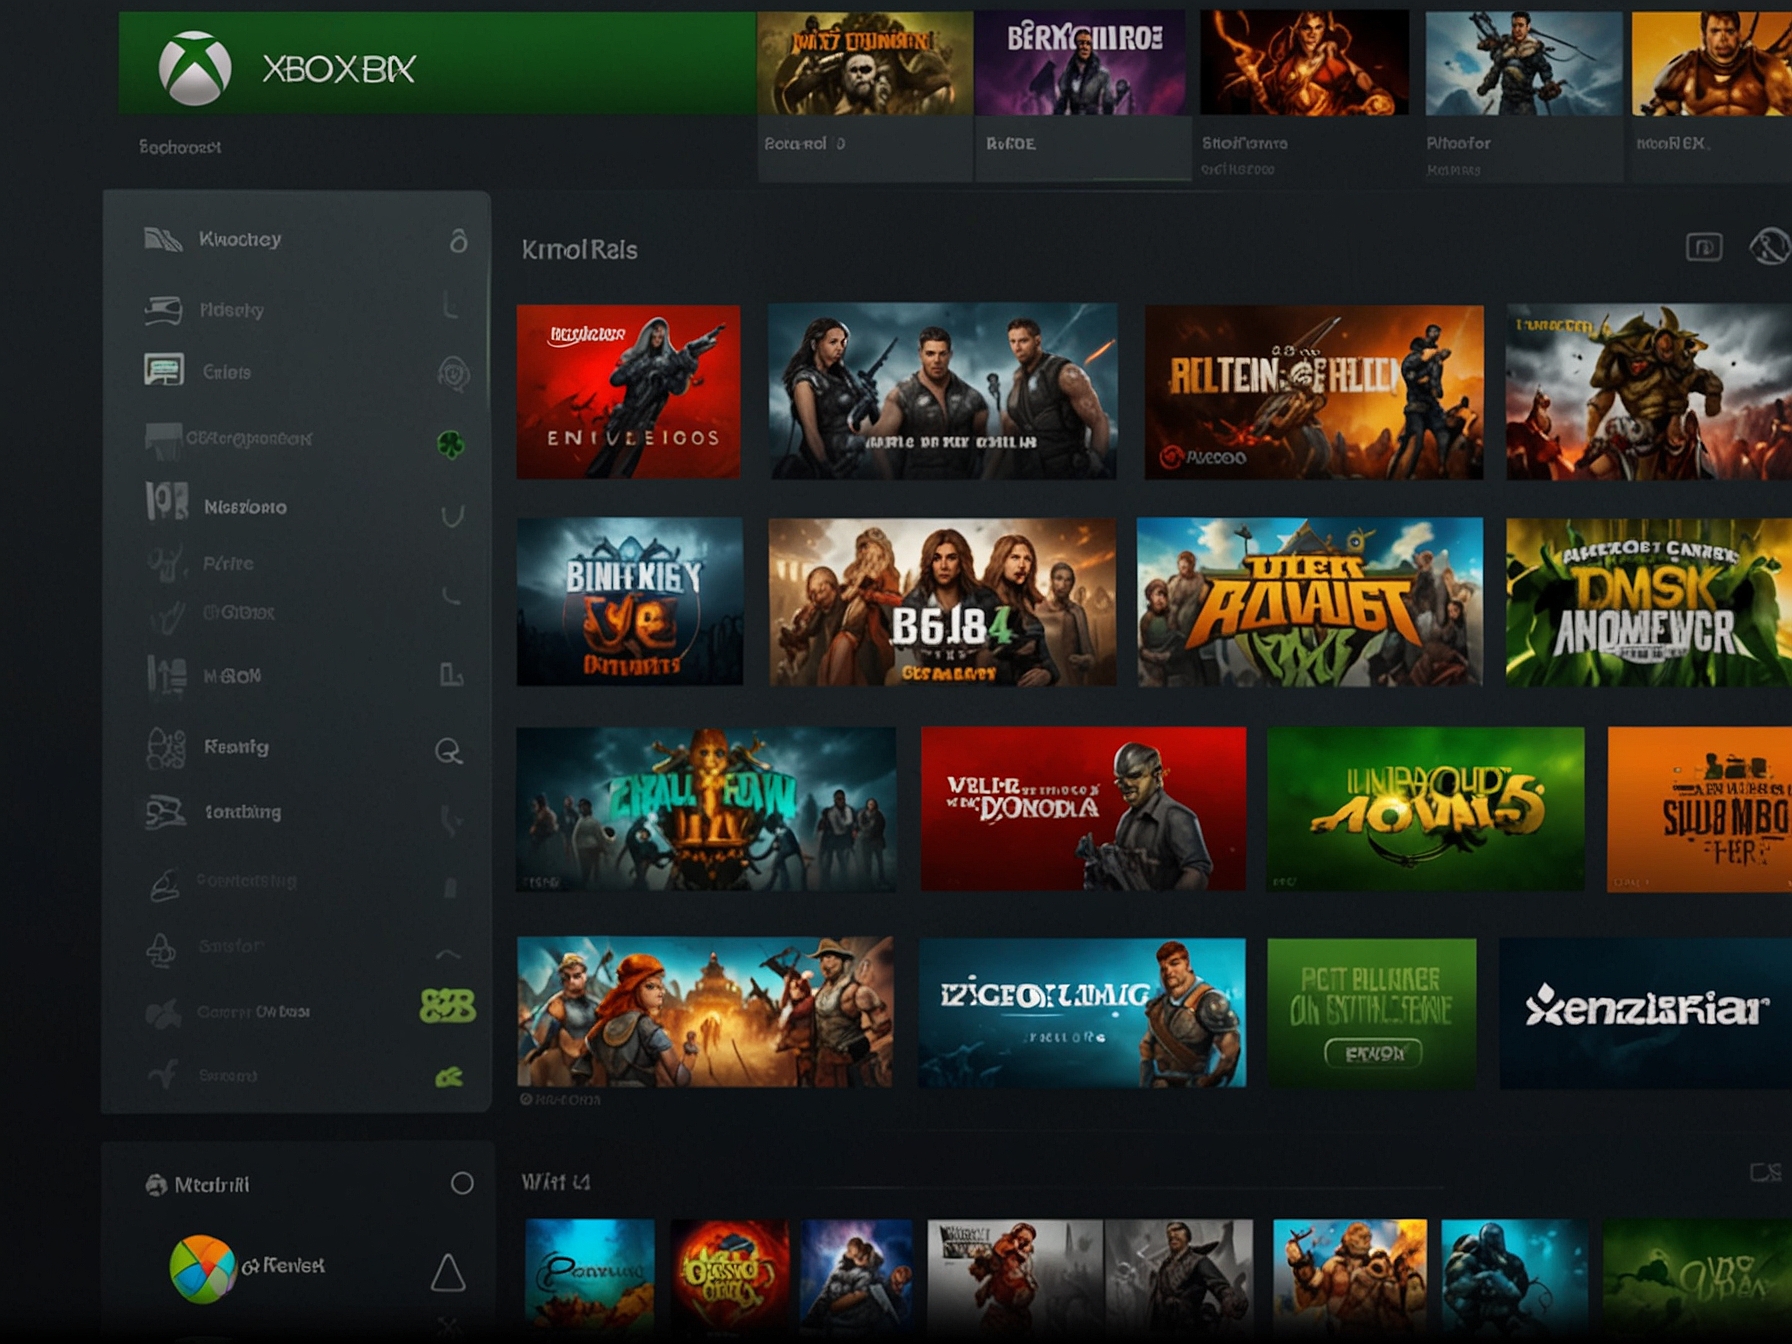 Illustration of an Amazon Fire TV interface showcasing the new Xbox App, with icons for popular games available through the Game Pass Ultimate library.